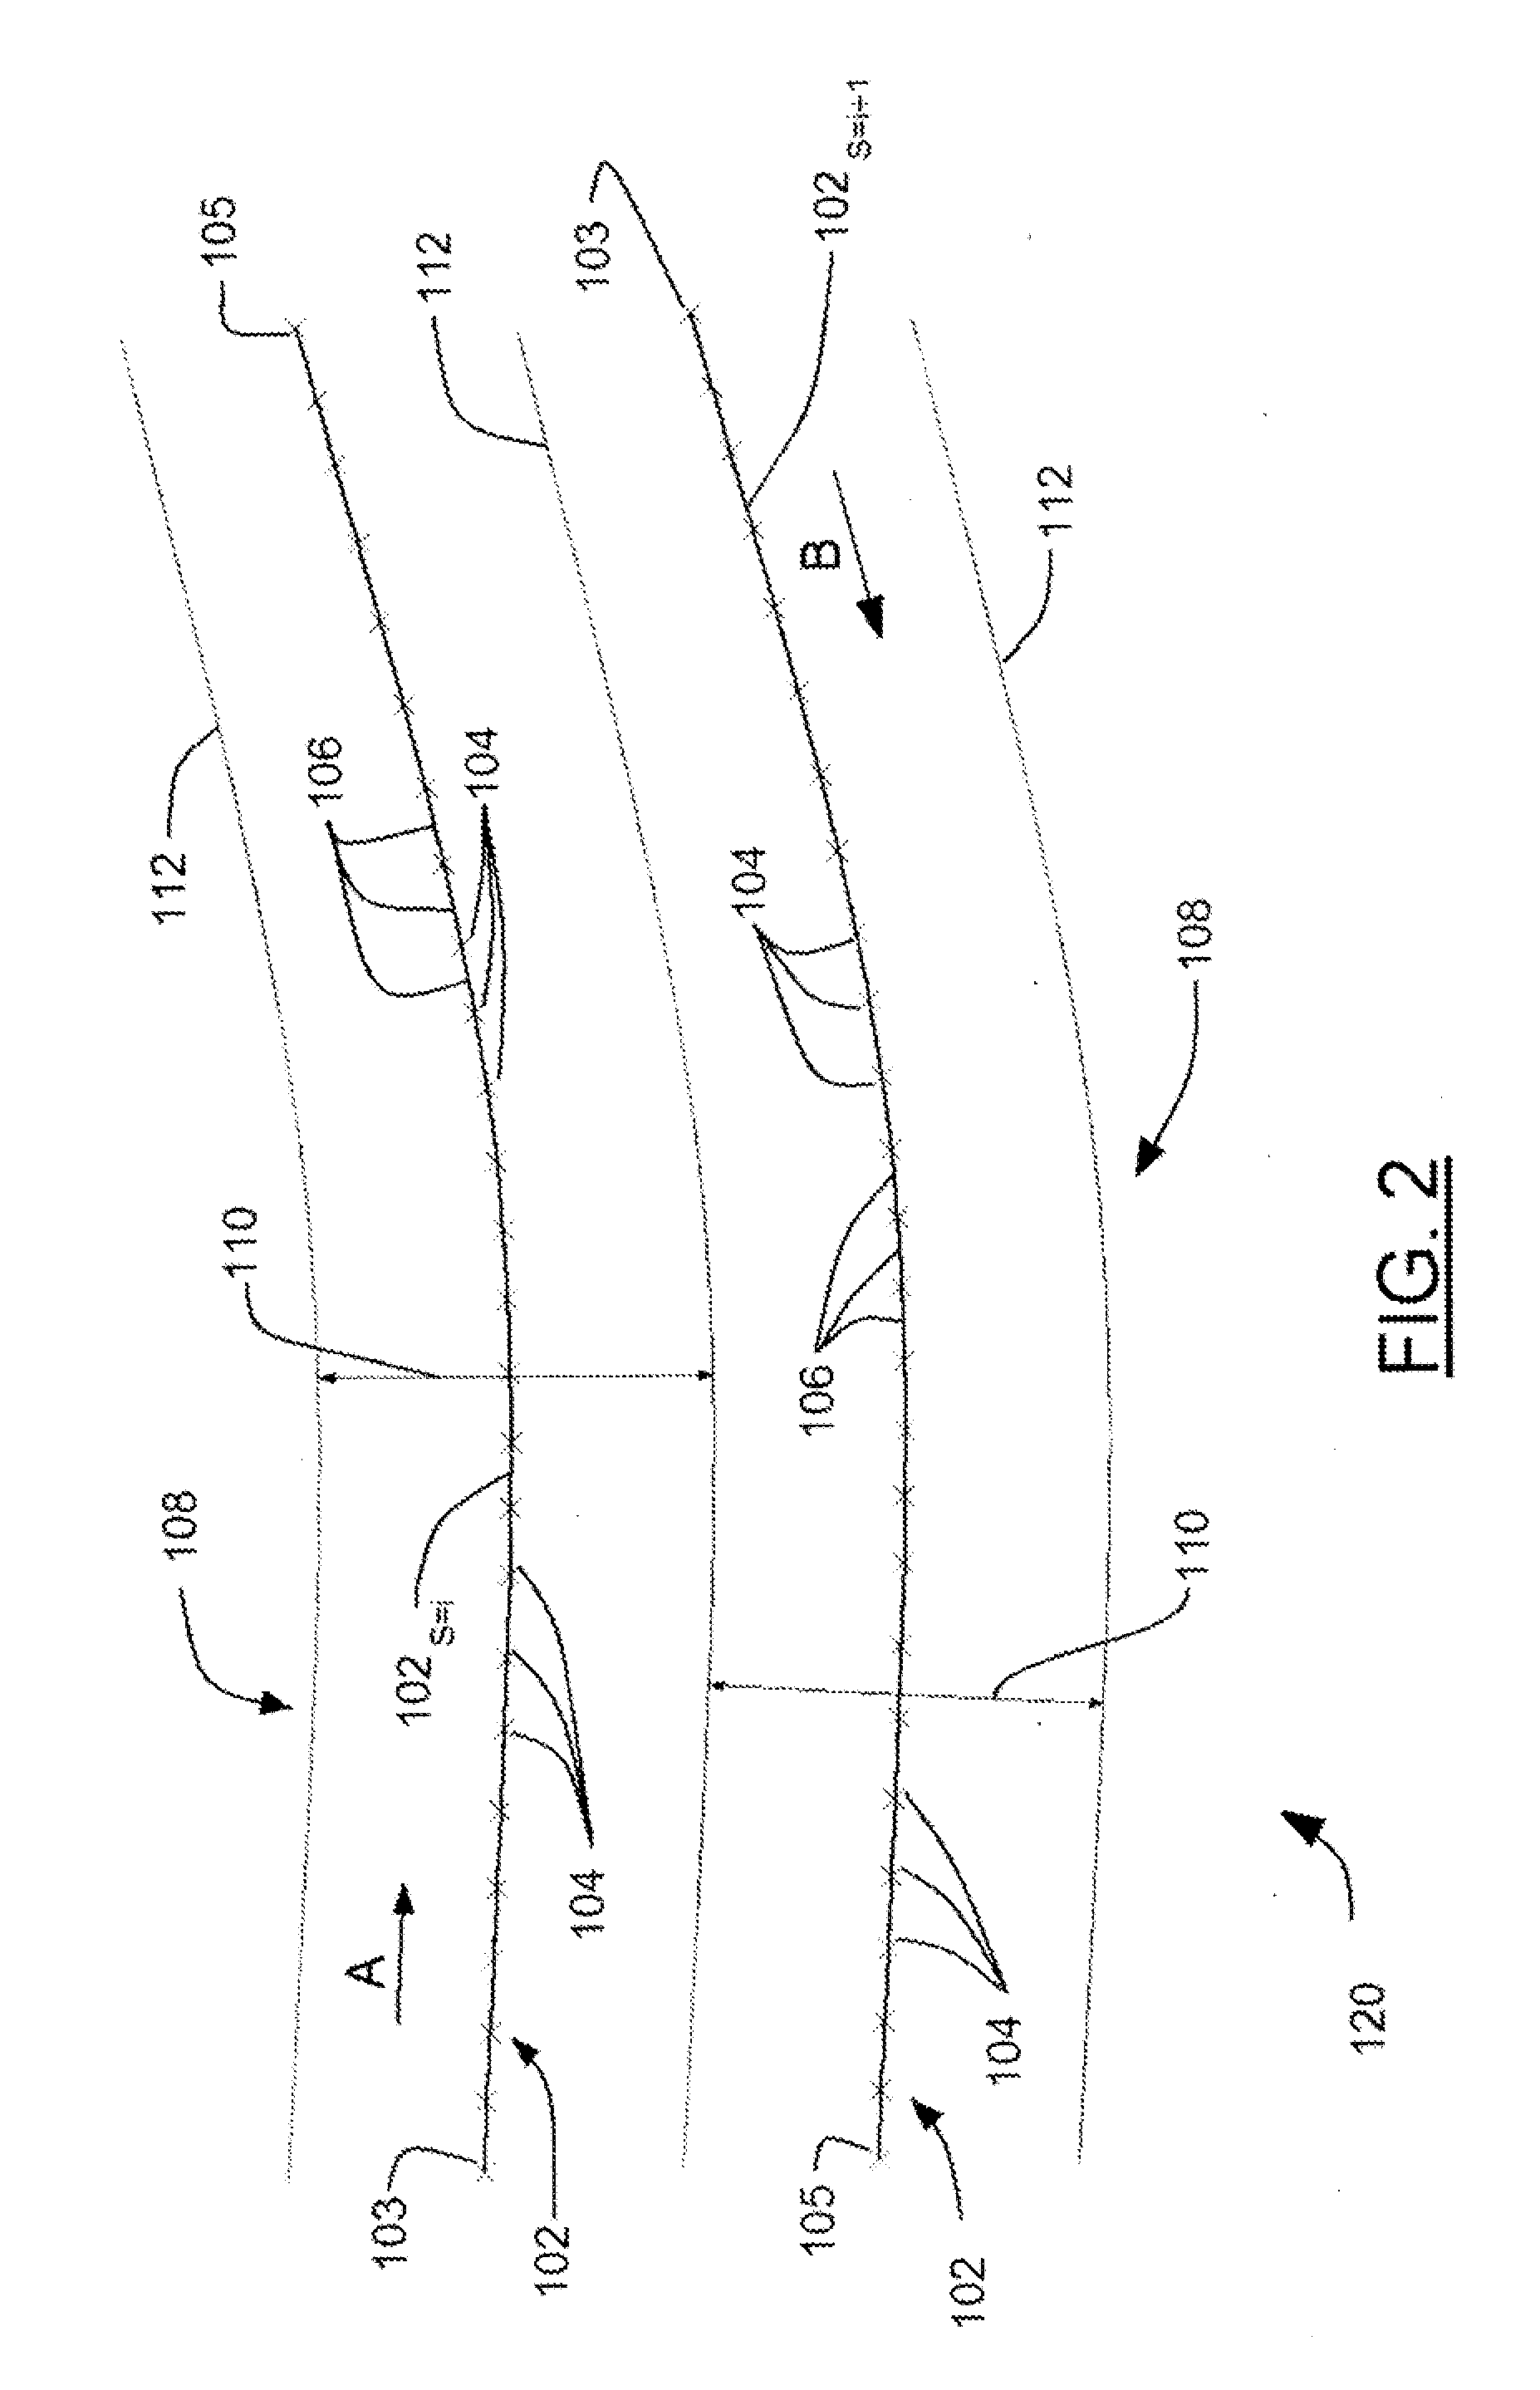 Method and apparatus for creating curved swath patterns for farm machinery